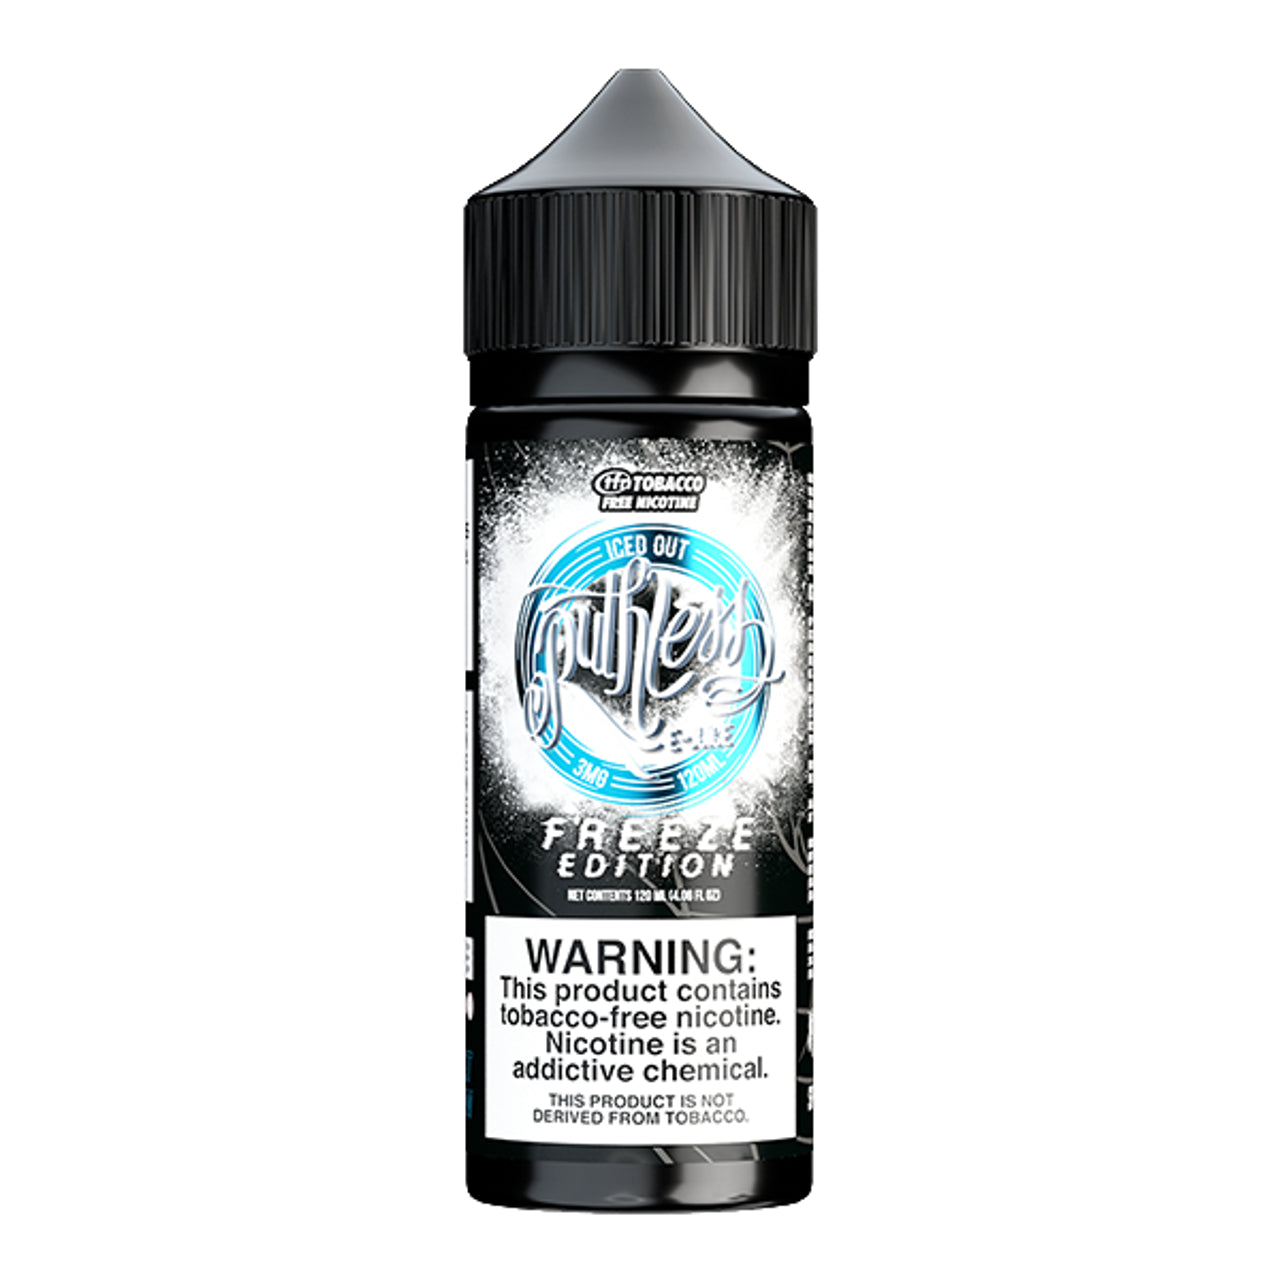 Ruthless Series E-Liquid 120mL (Freebase) | Iced Out (Freeze Edition)